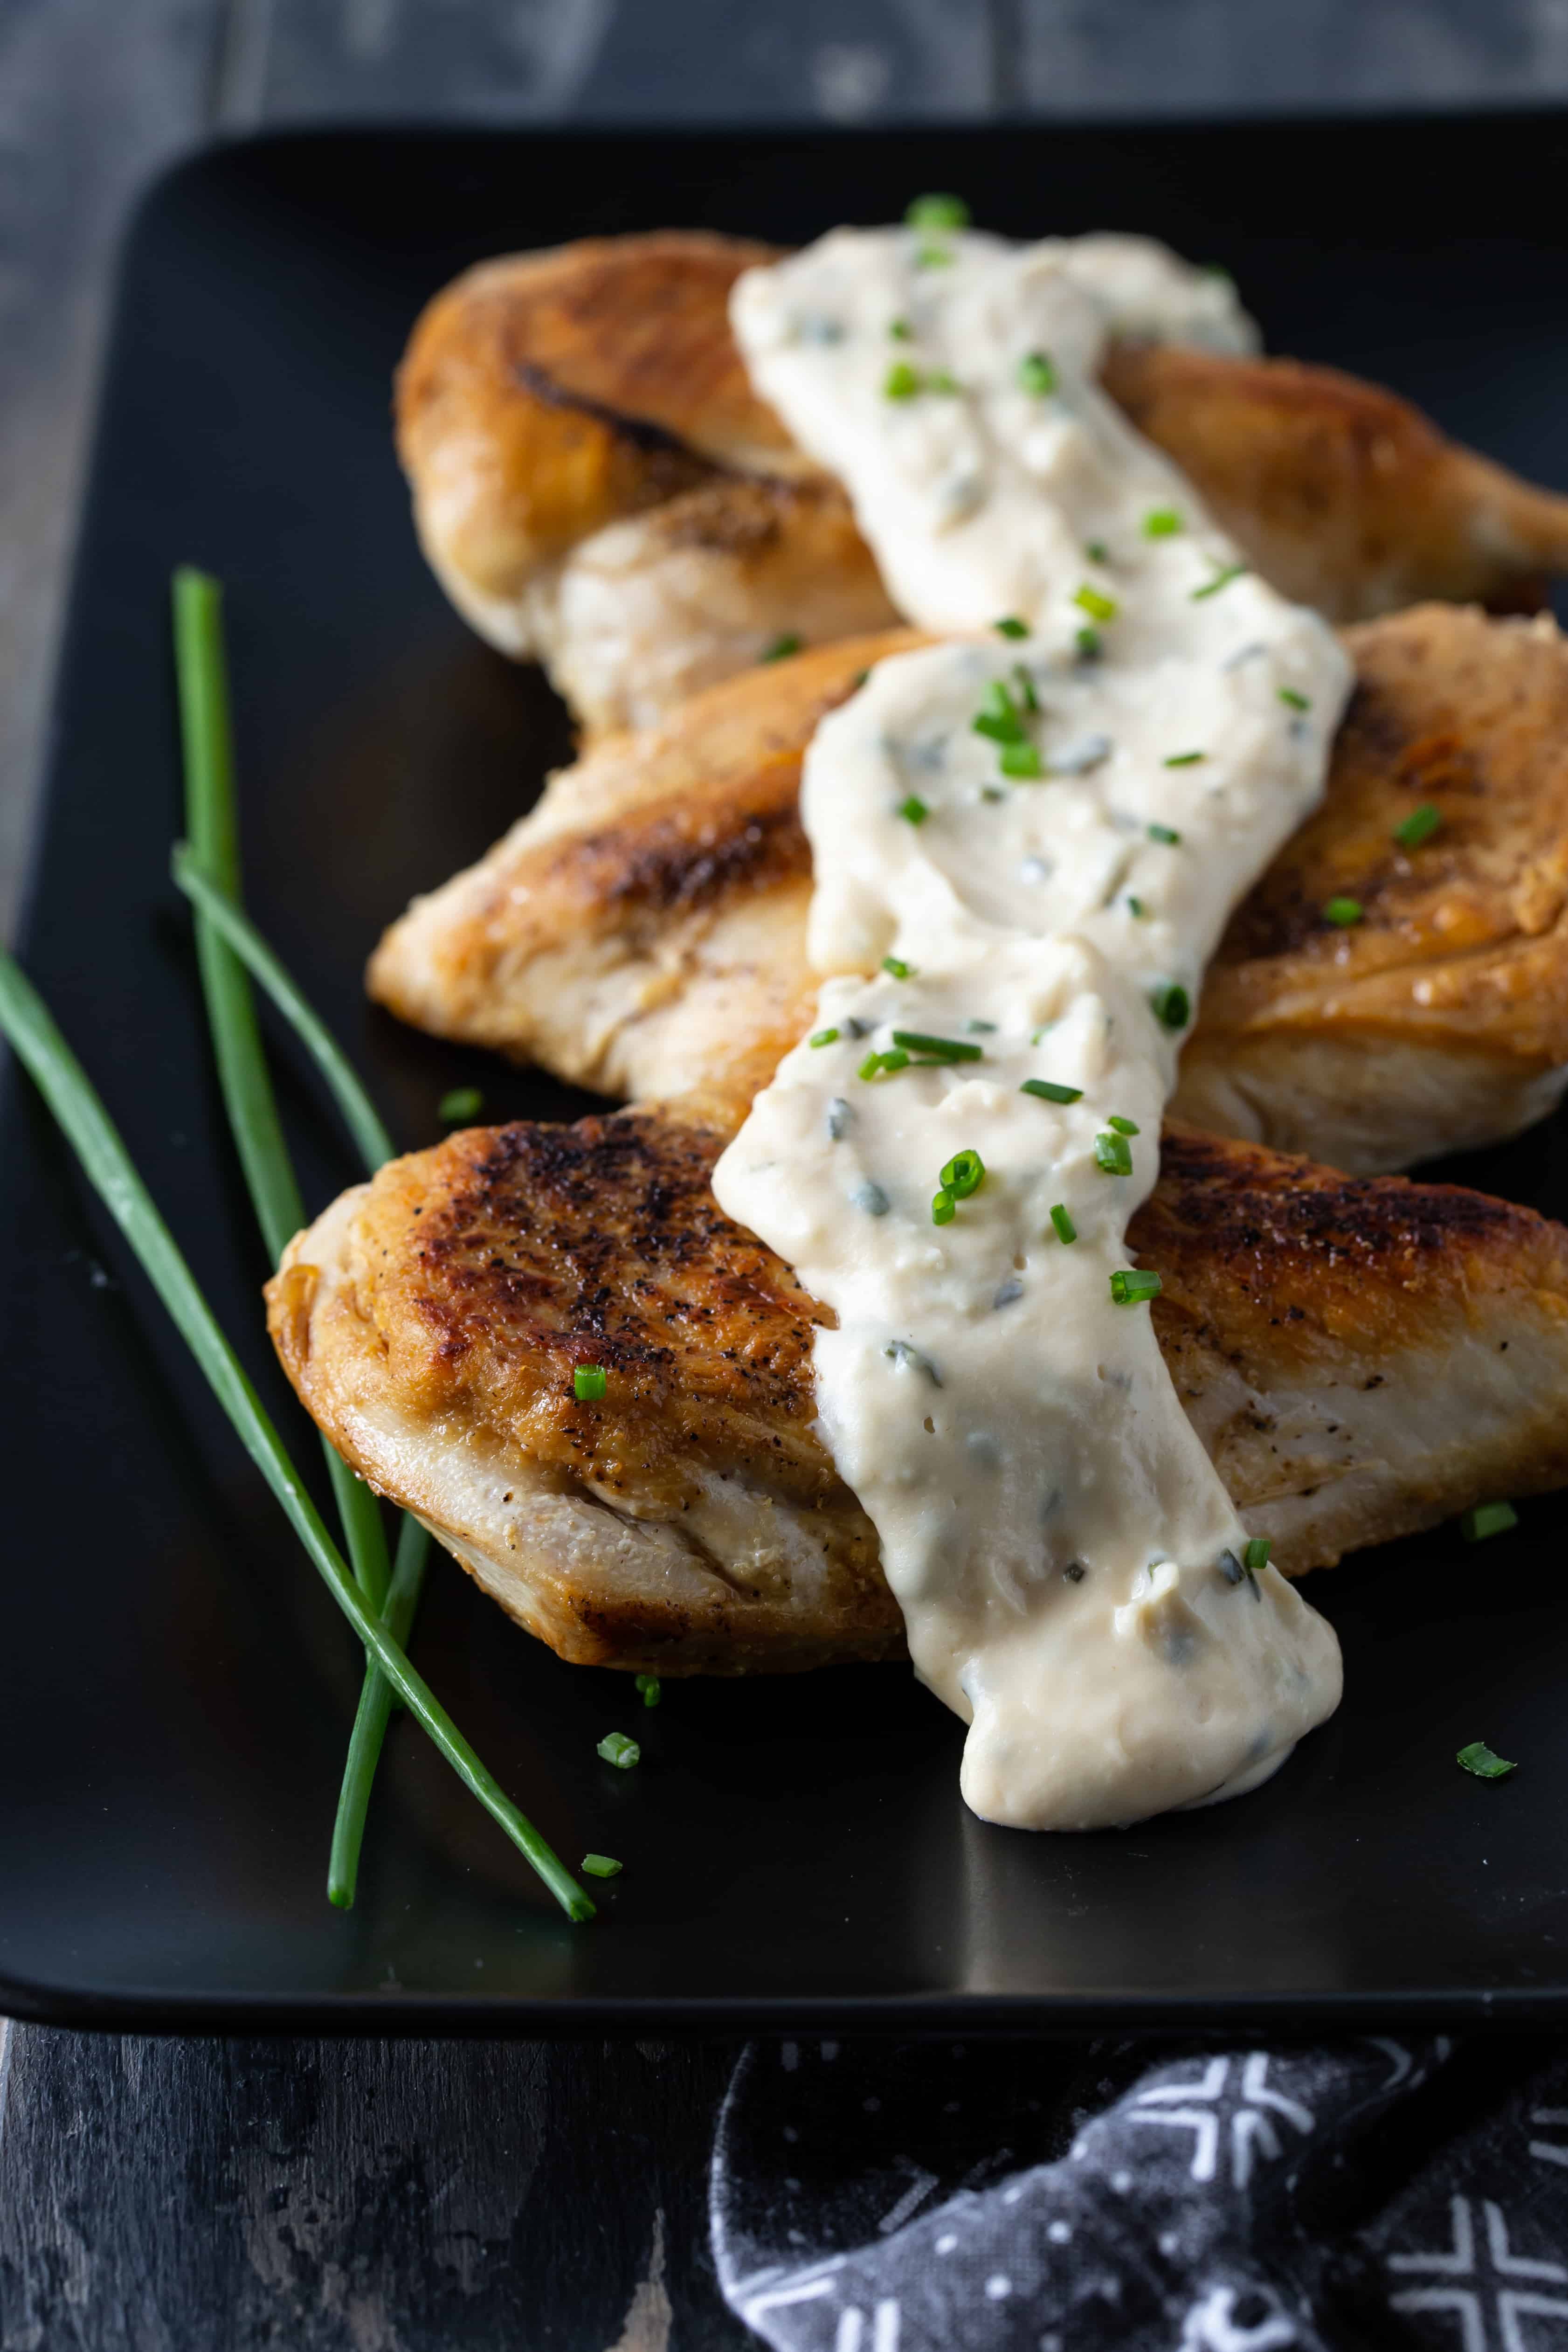 A close up of chicken with feta cheese sauce, with chives.